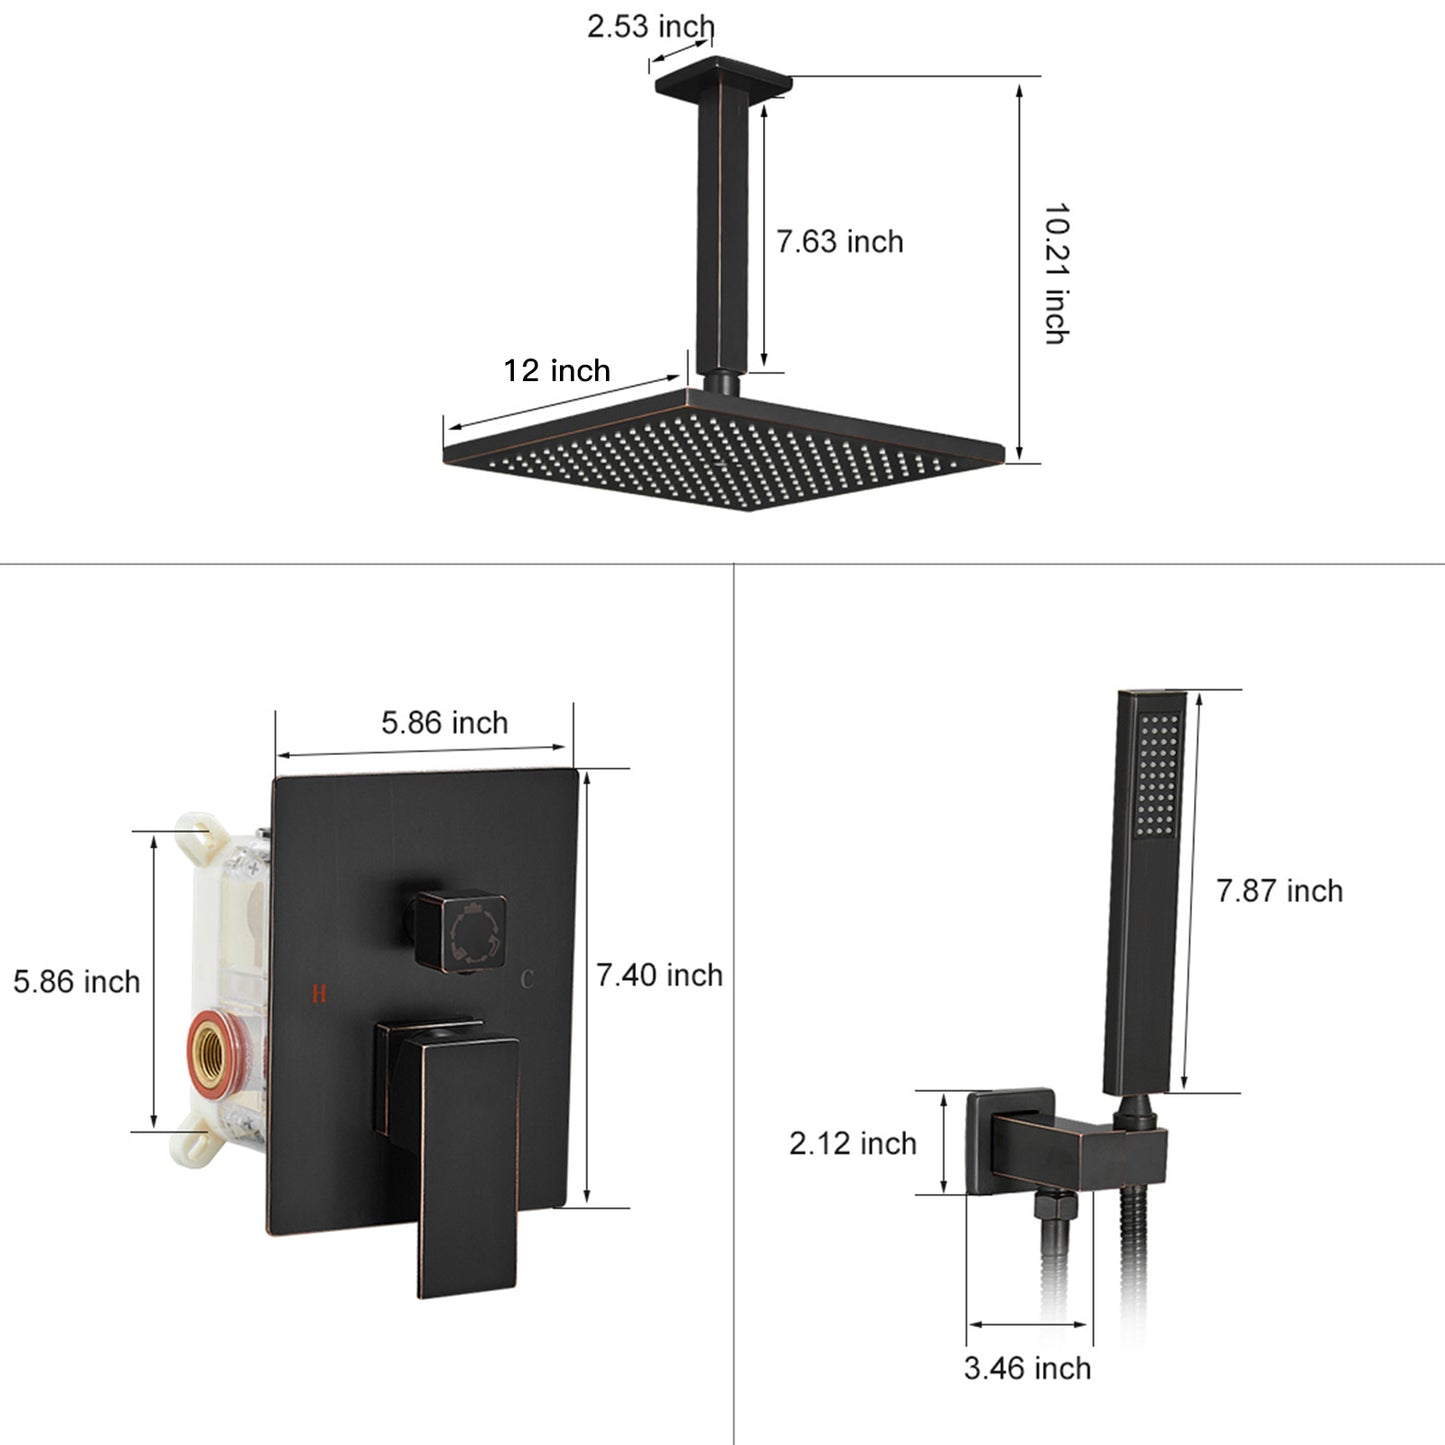 Square Oil Rubbed Bronze High Pressure Shower Faucet with 2 Handles and 10 Ceiling Shower Head